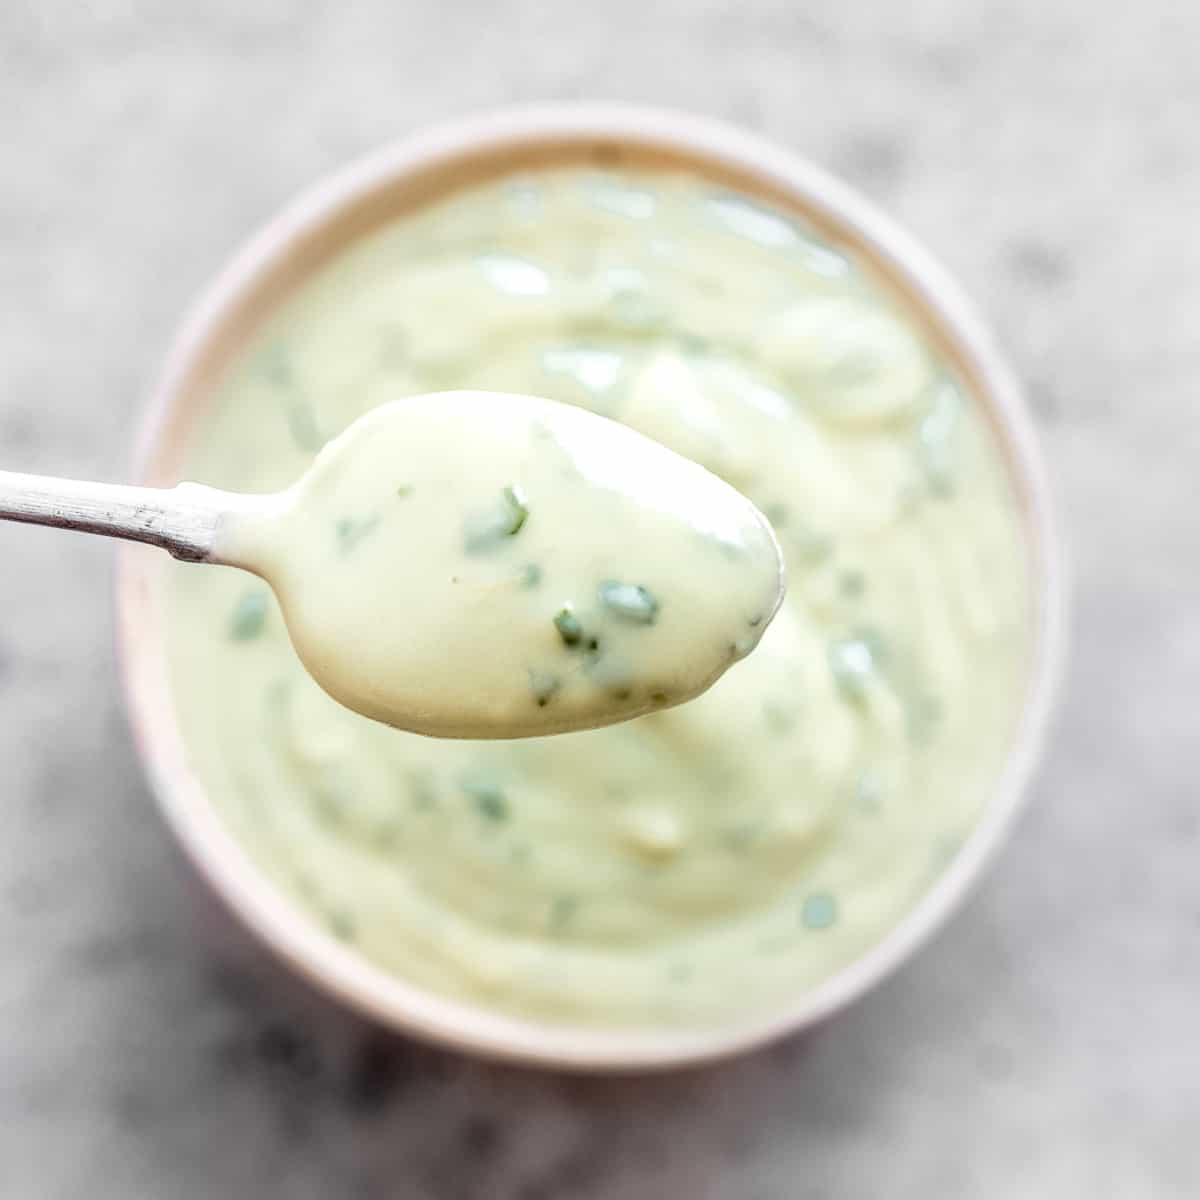 Avocado lime crema in a bowl with a spoon.